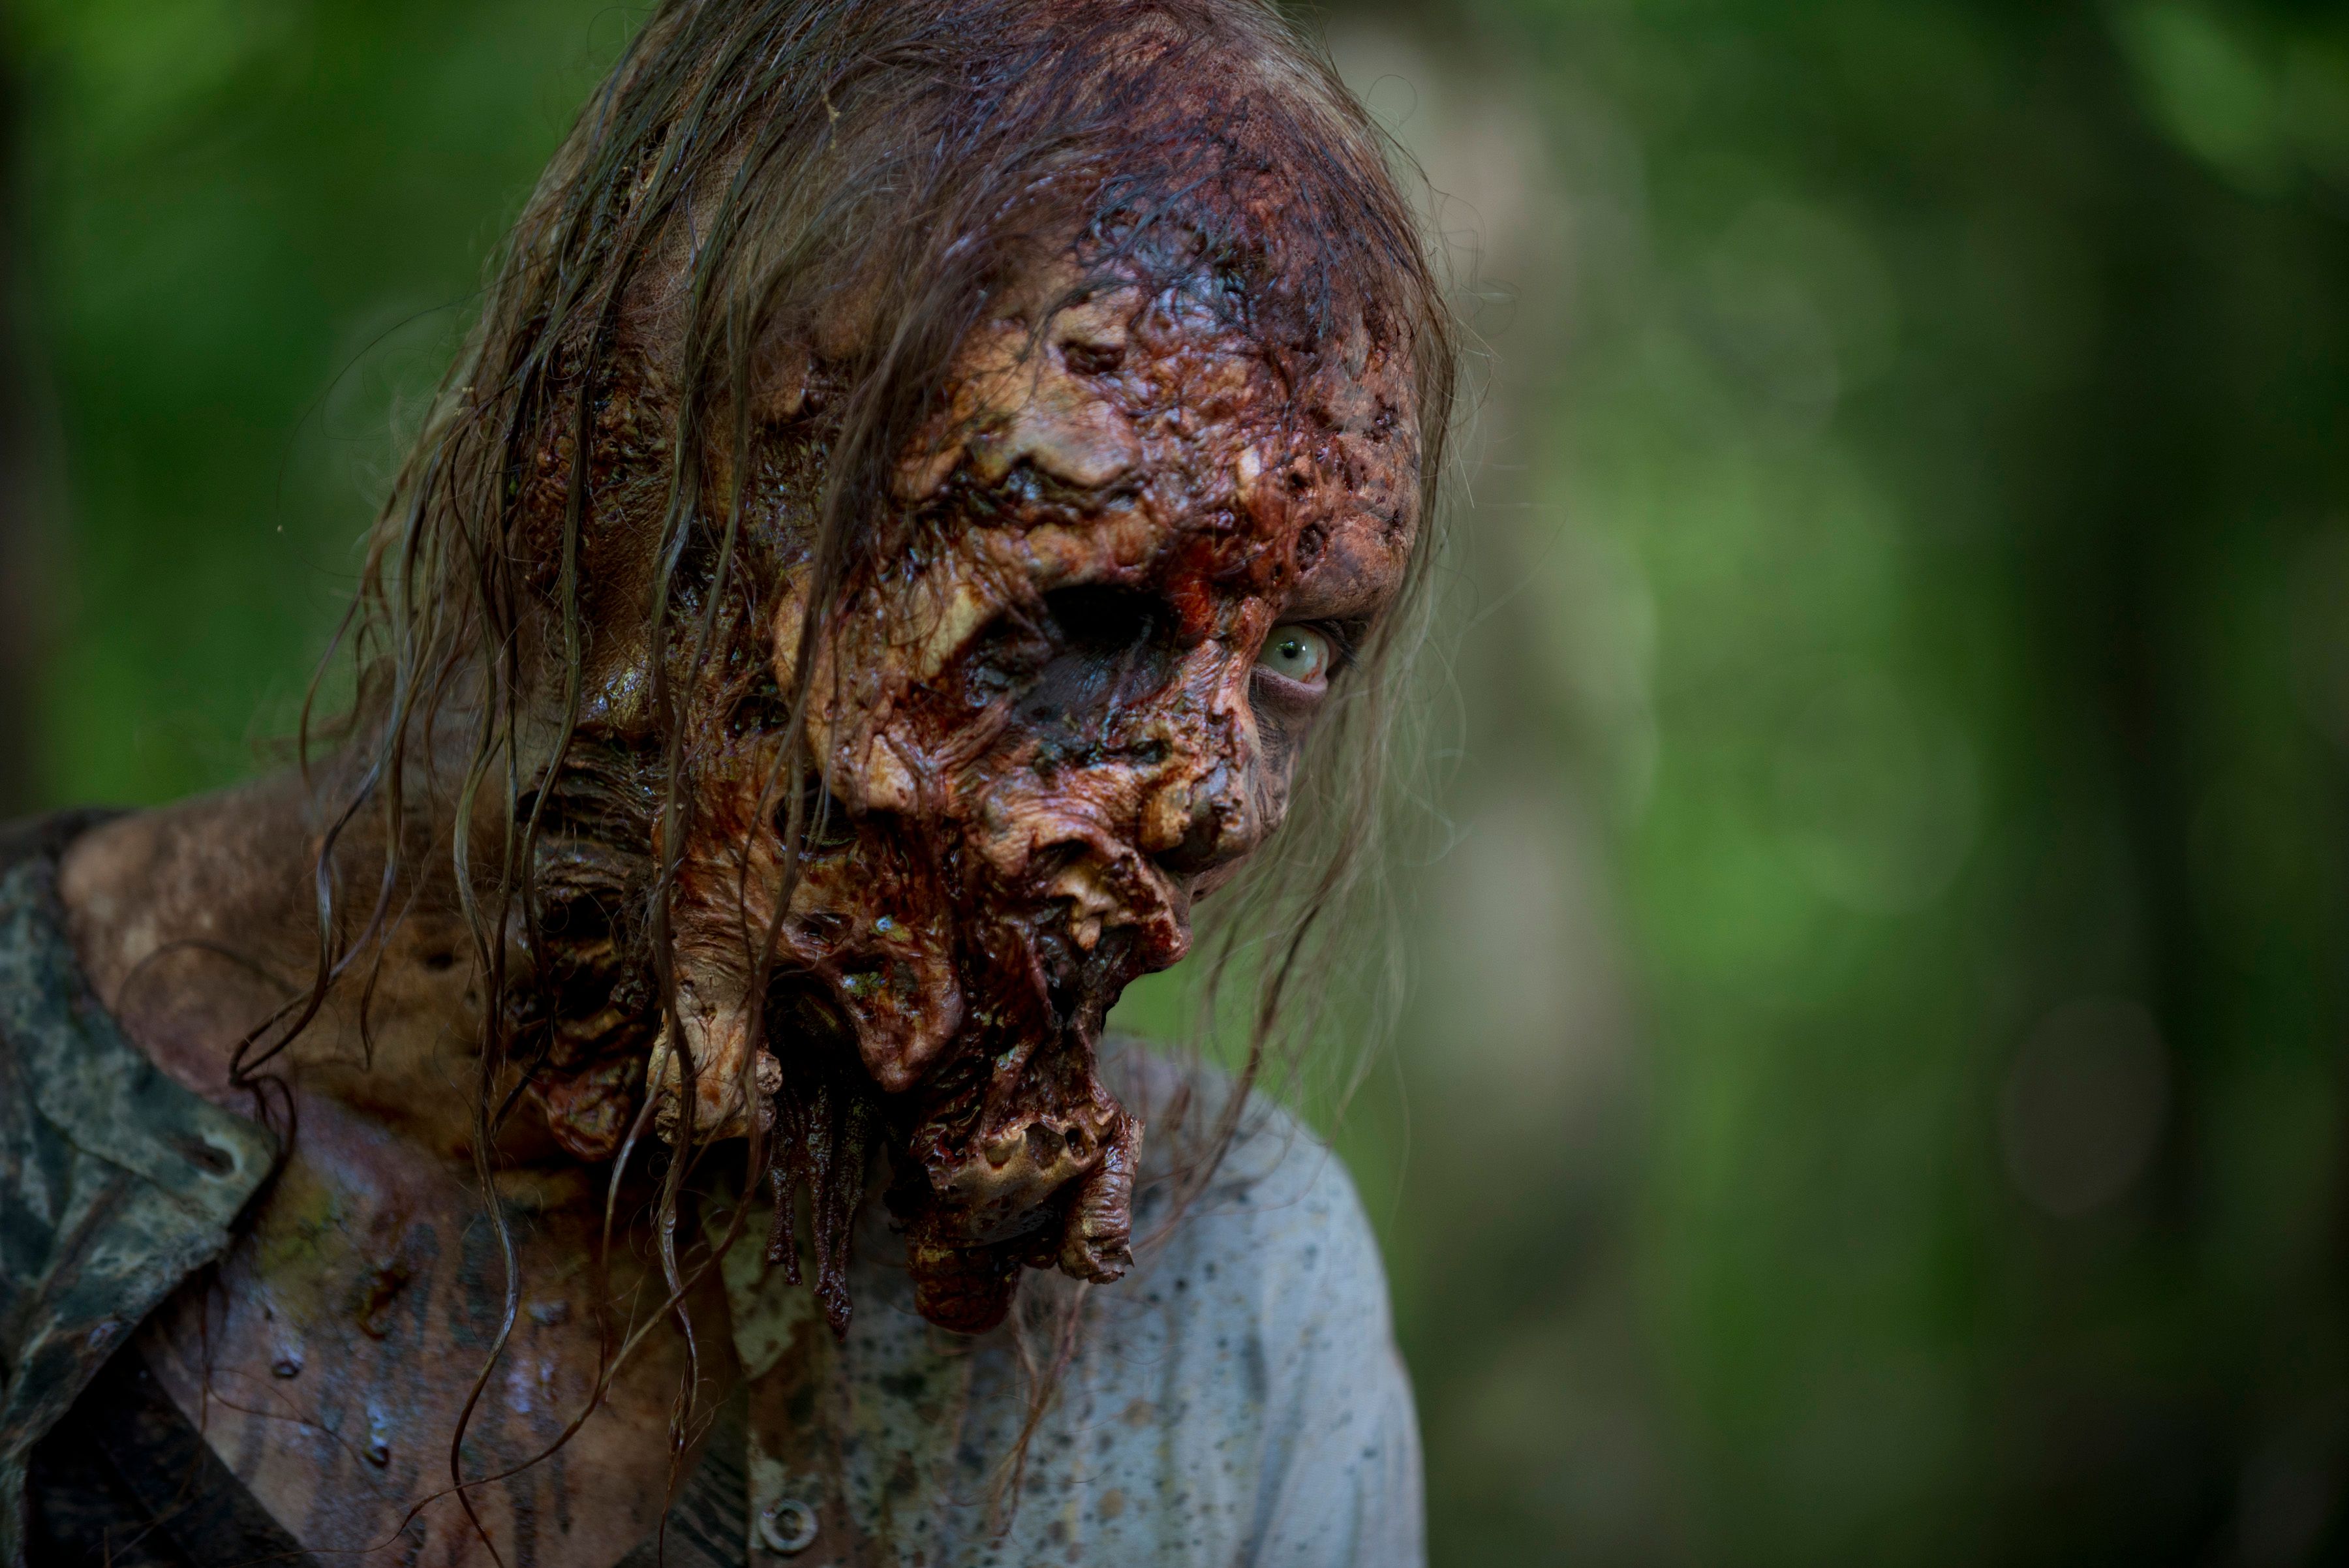 10 Things We Know So Far About Zombies According To TWD